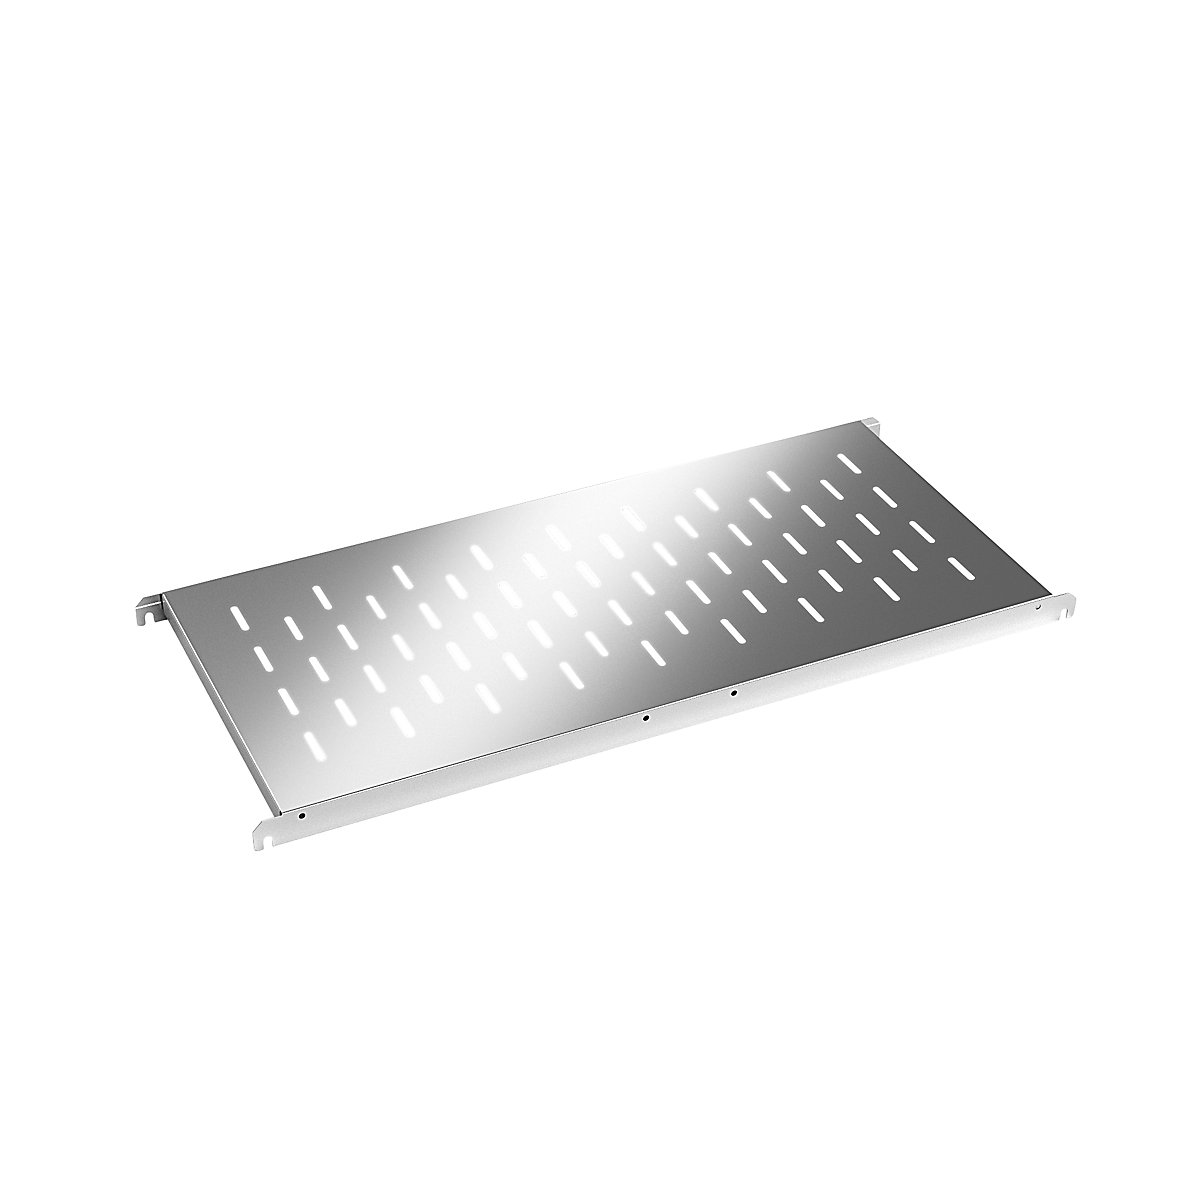 Stainless steel shelf, perforated, WxD 940 x 440 mm